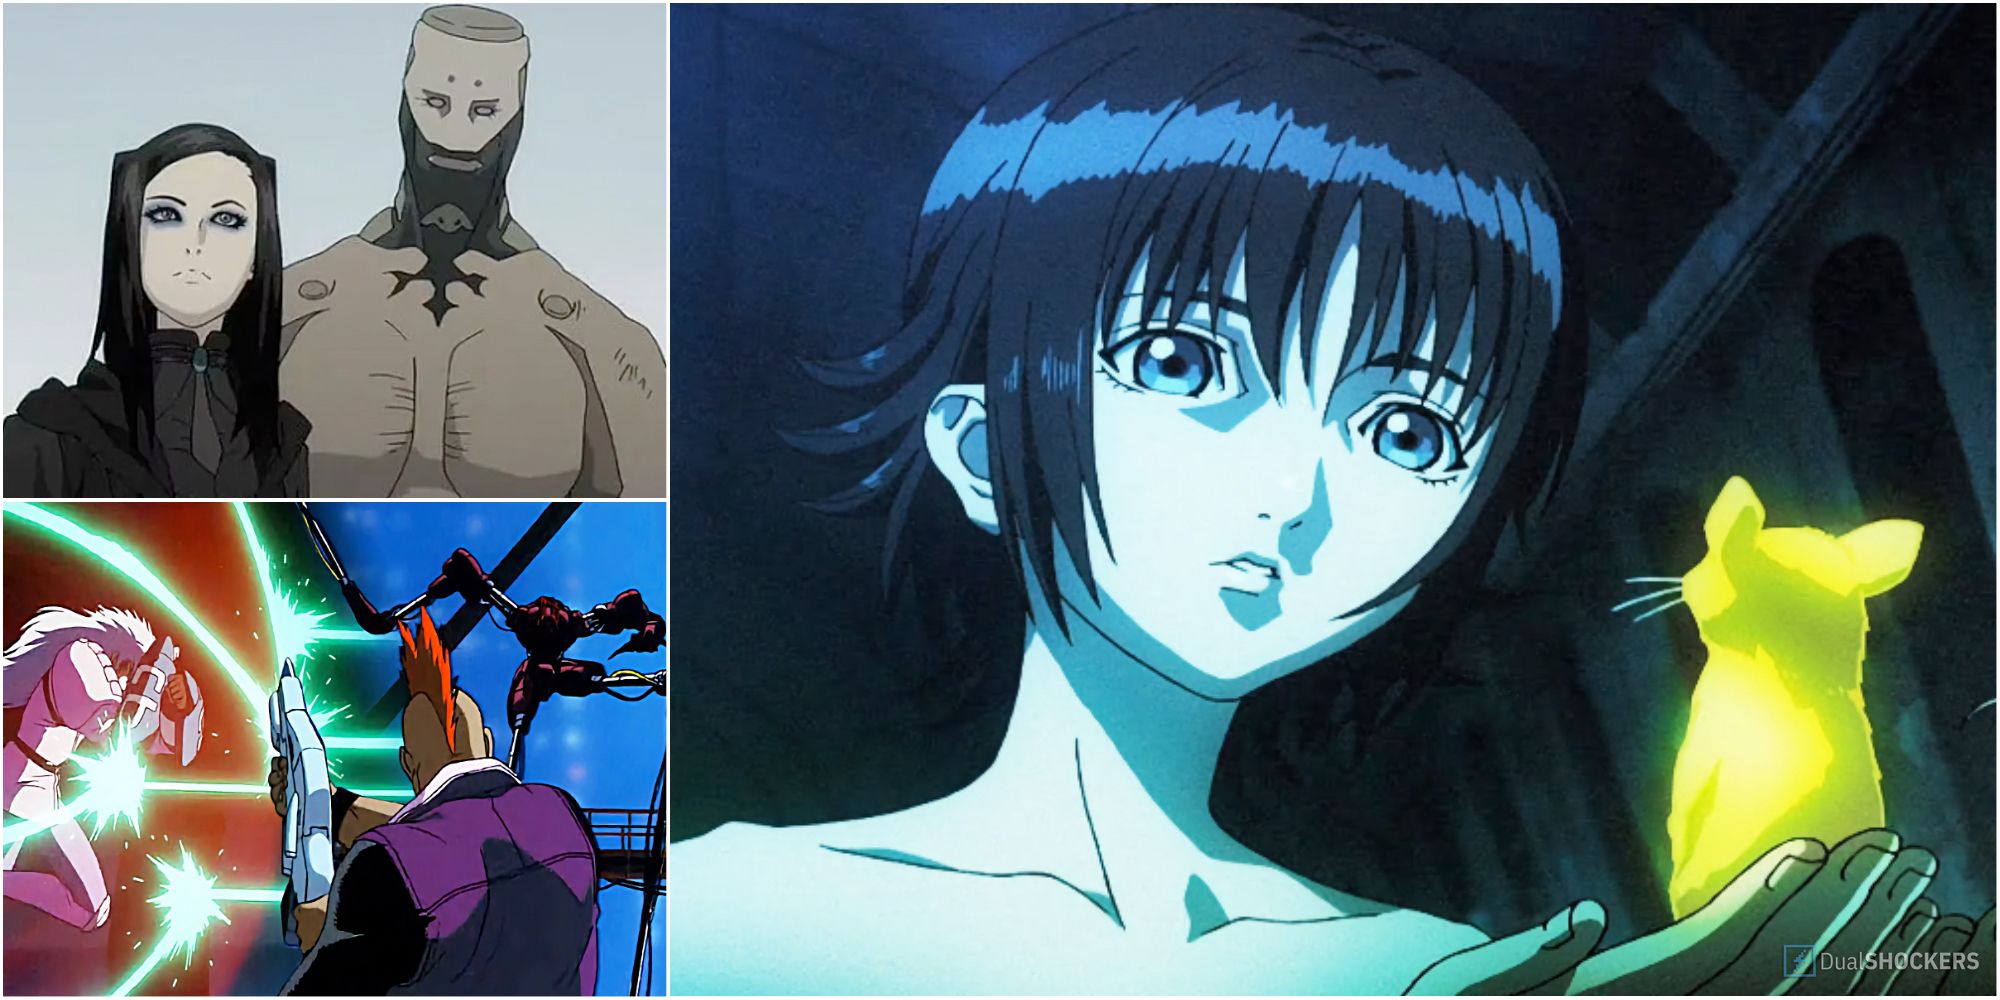 The Best Cyberpunk Anime Masterpieces You Should Watch